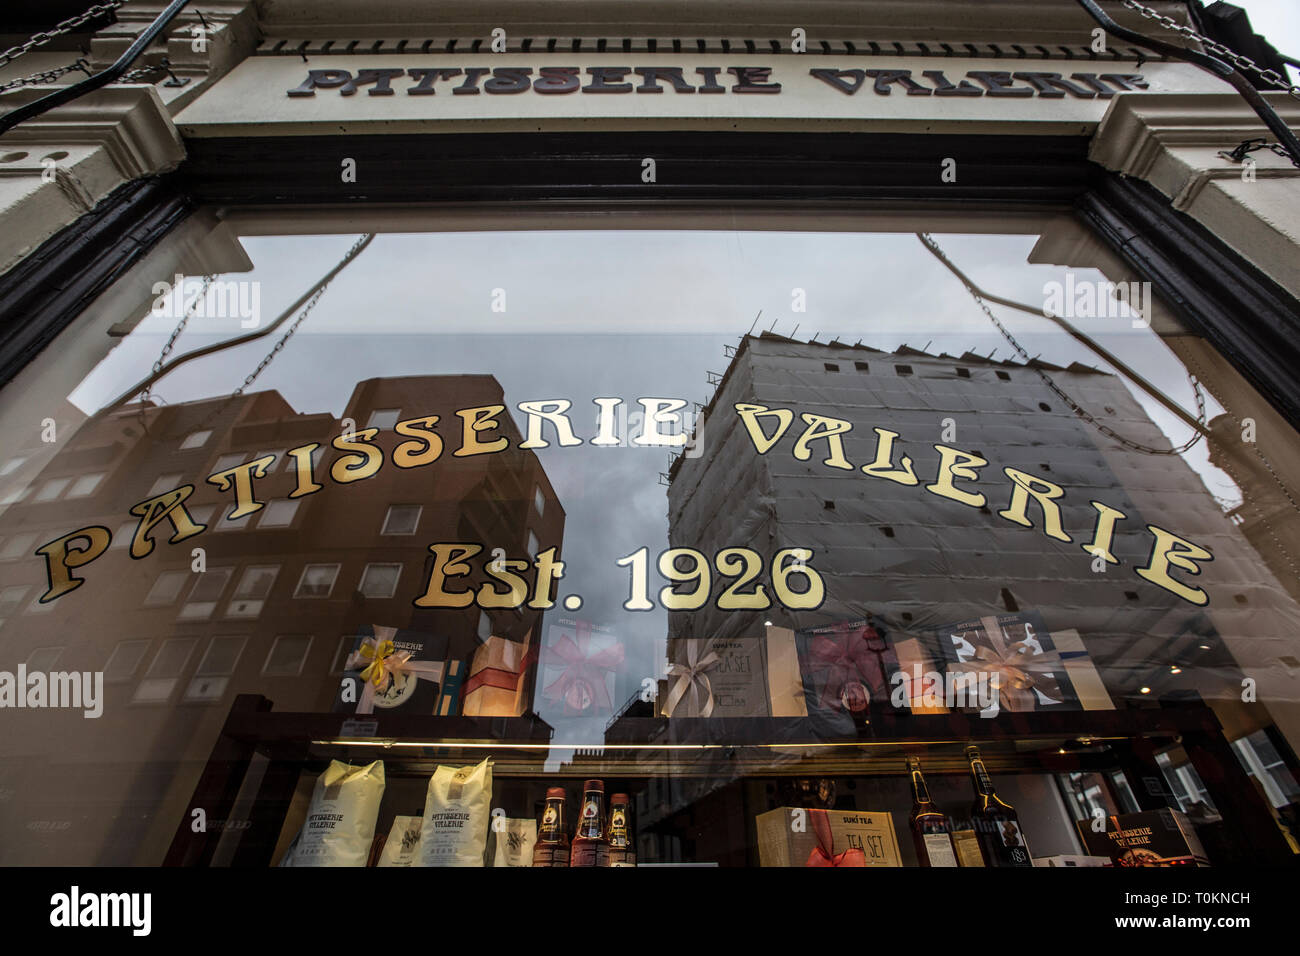 Patisserie Valerie, chain of cafés that operates in the United Kingdom, The Patisserie Valerie chain has more than 200 stores across the UK. Stock Photo